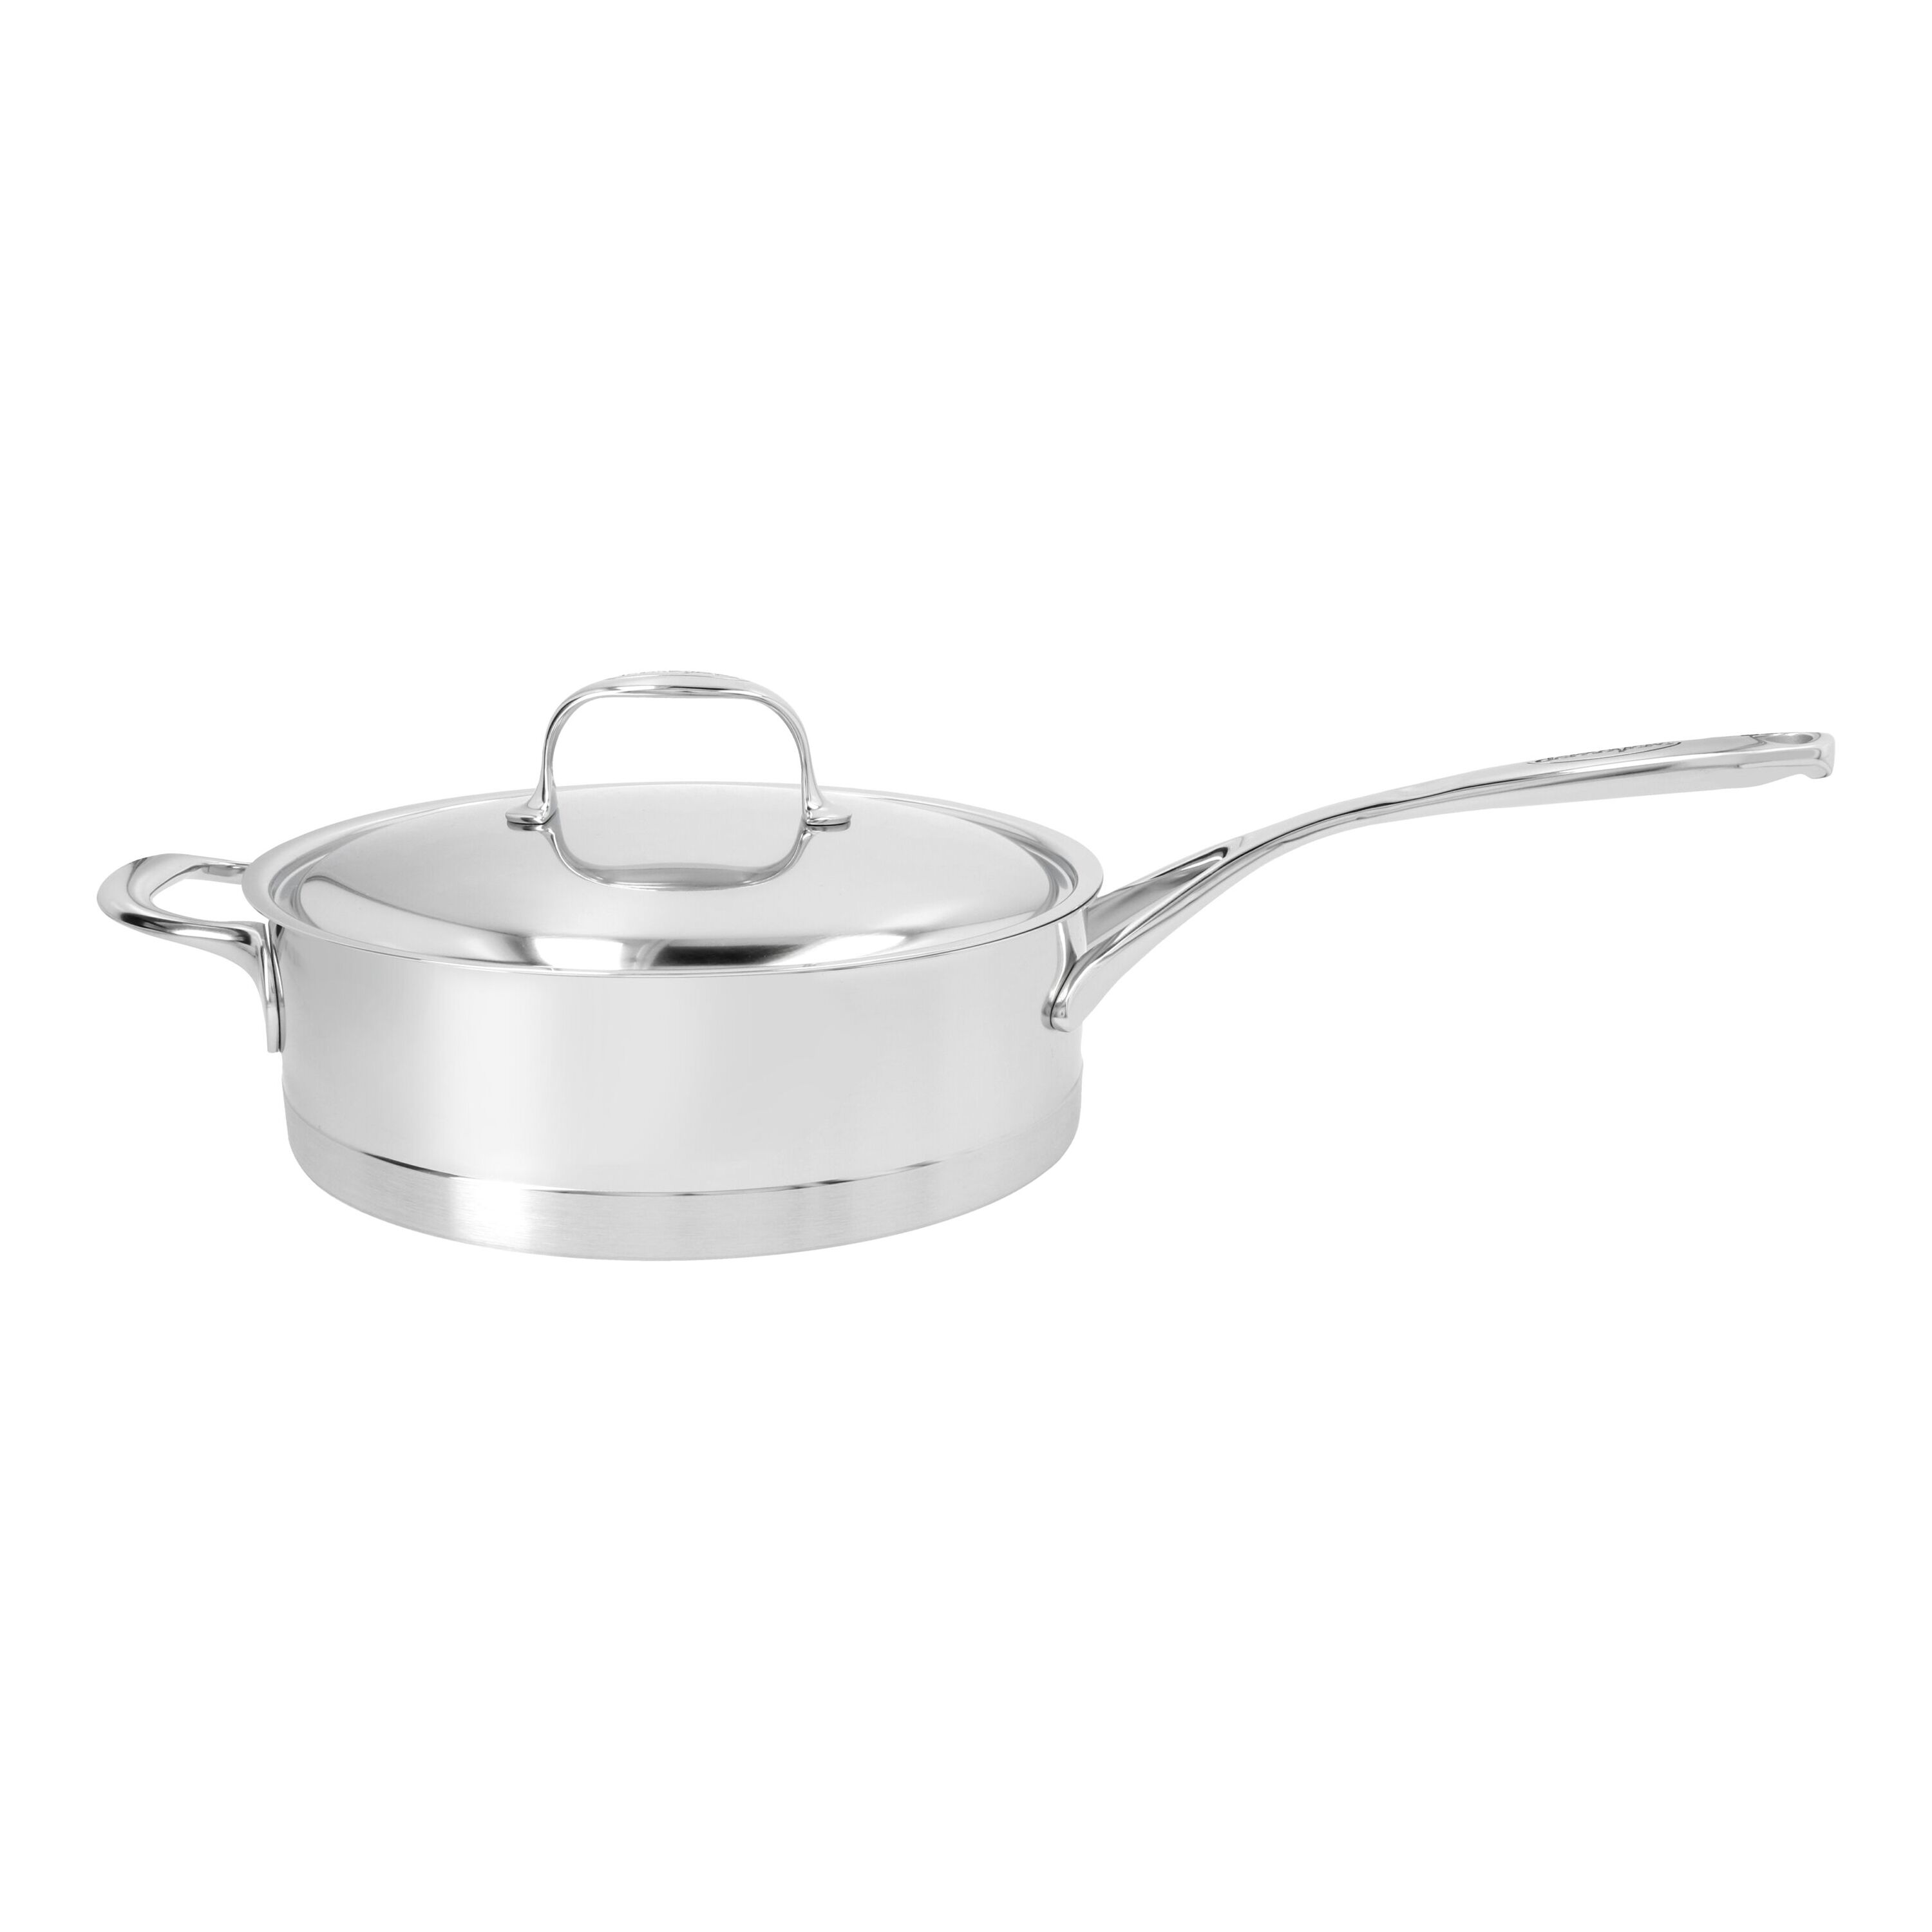 Intignis Saute Pan With Oven Proof Lid 28Cm Blue